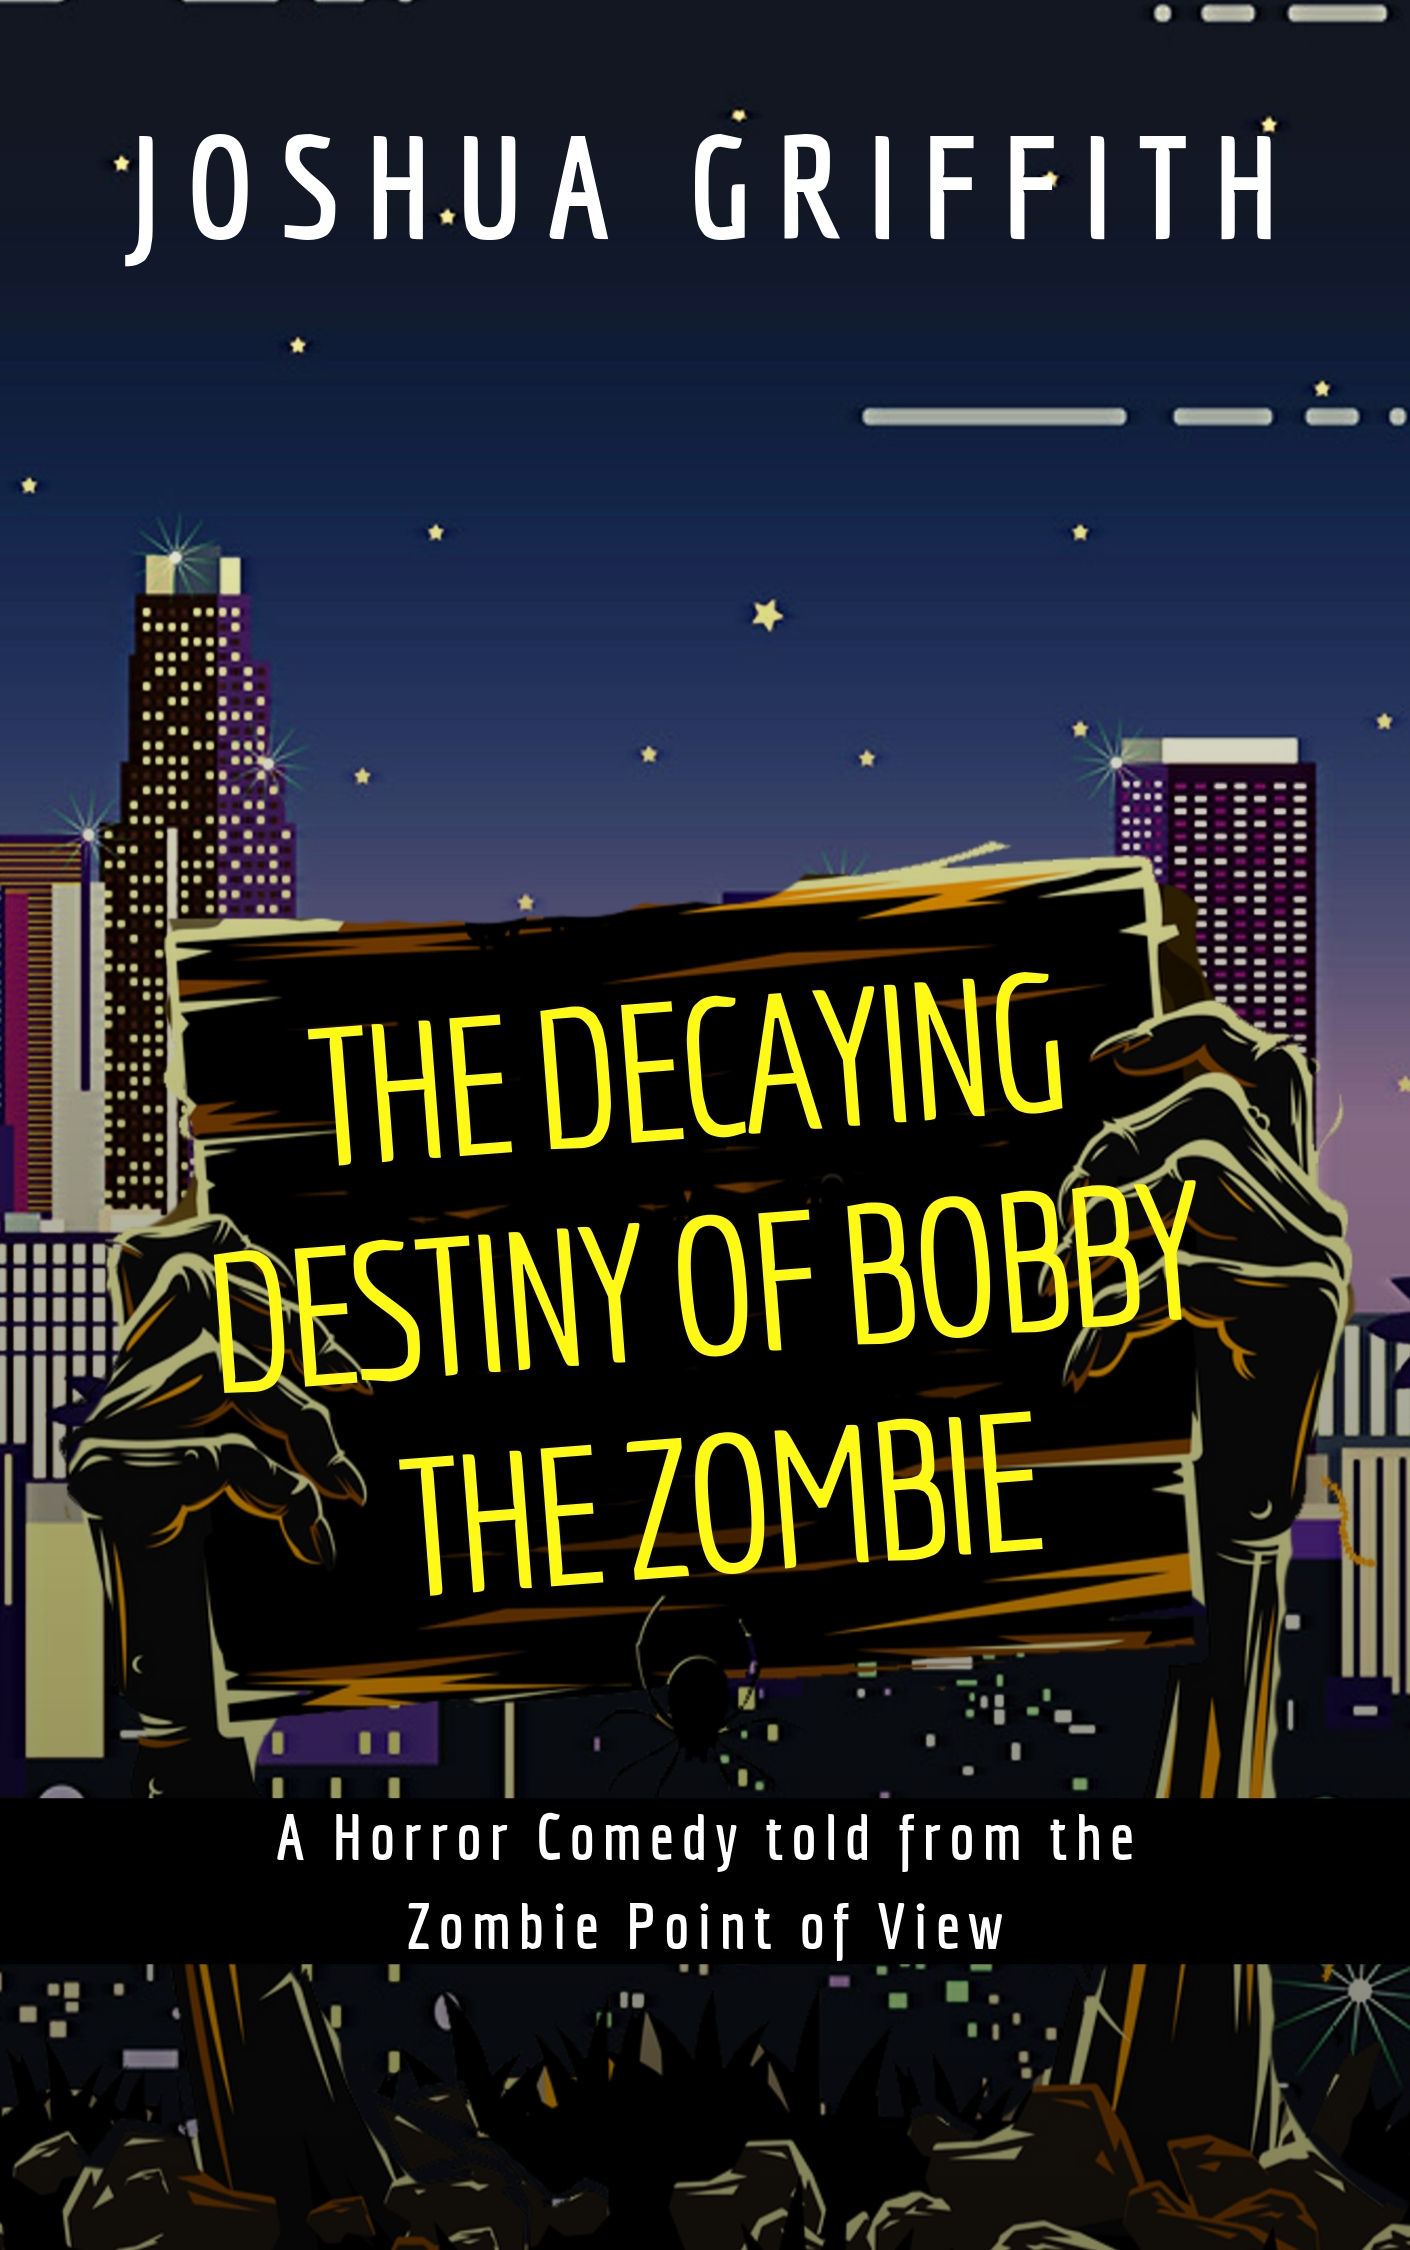 The Decaying Destiny of Bobby the Zombie: A Horror Comedy told from the Zombie point of view